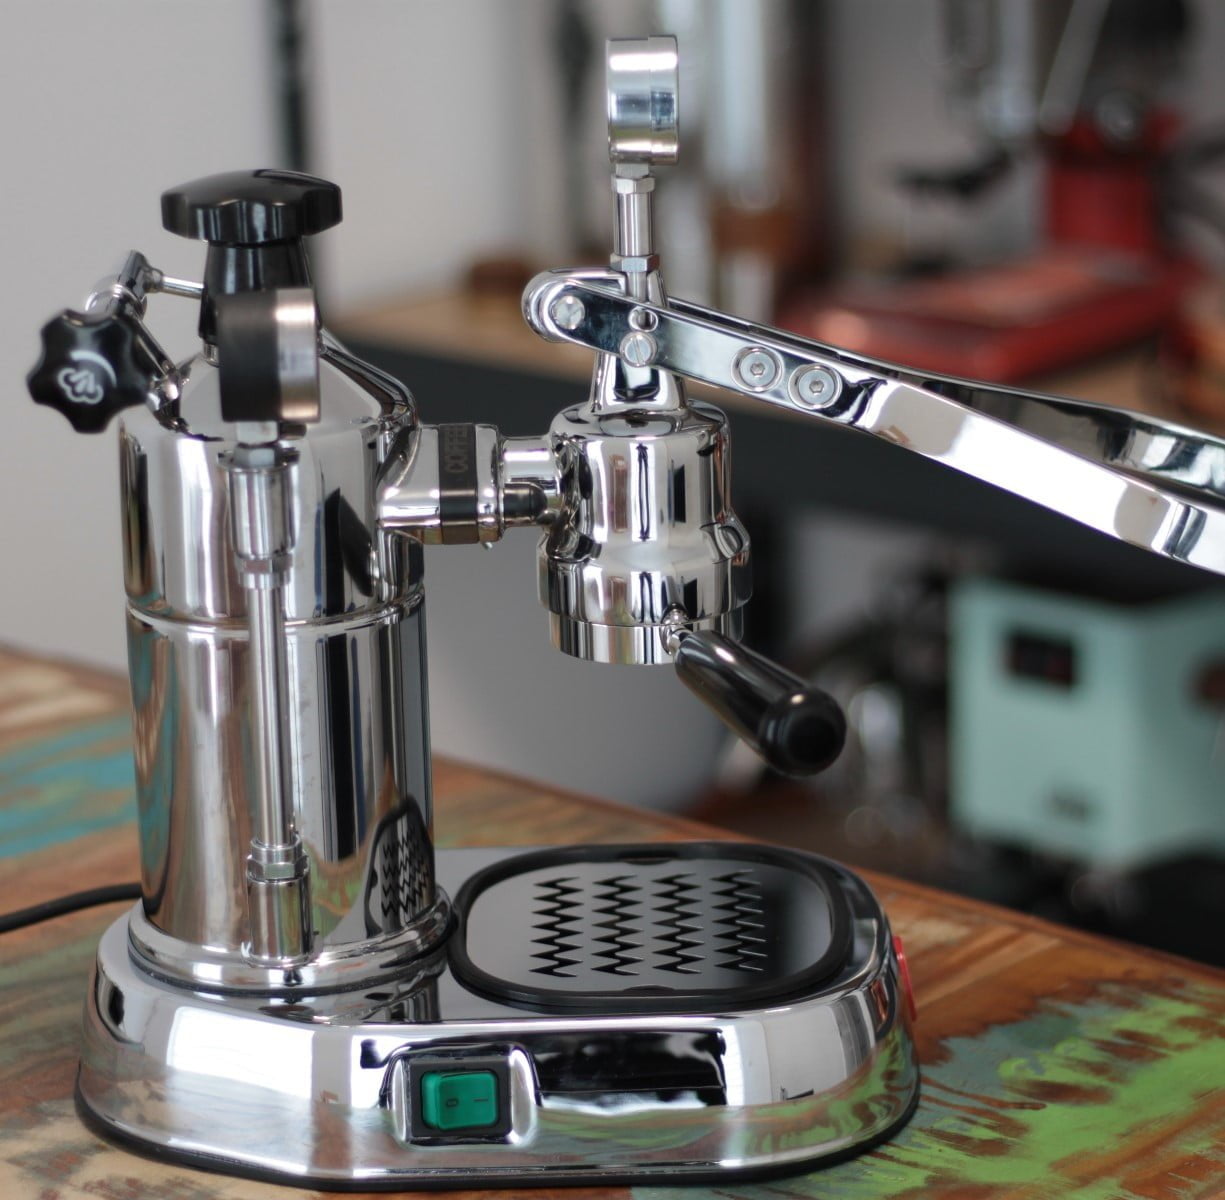 New La Pavoni Professional owner w/ thermometry questions